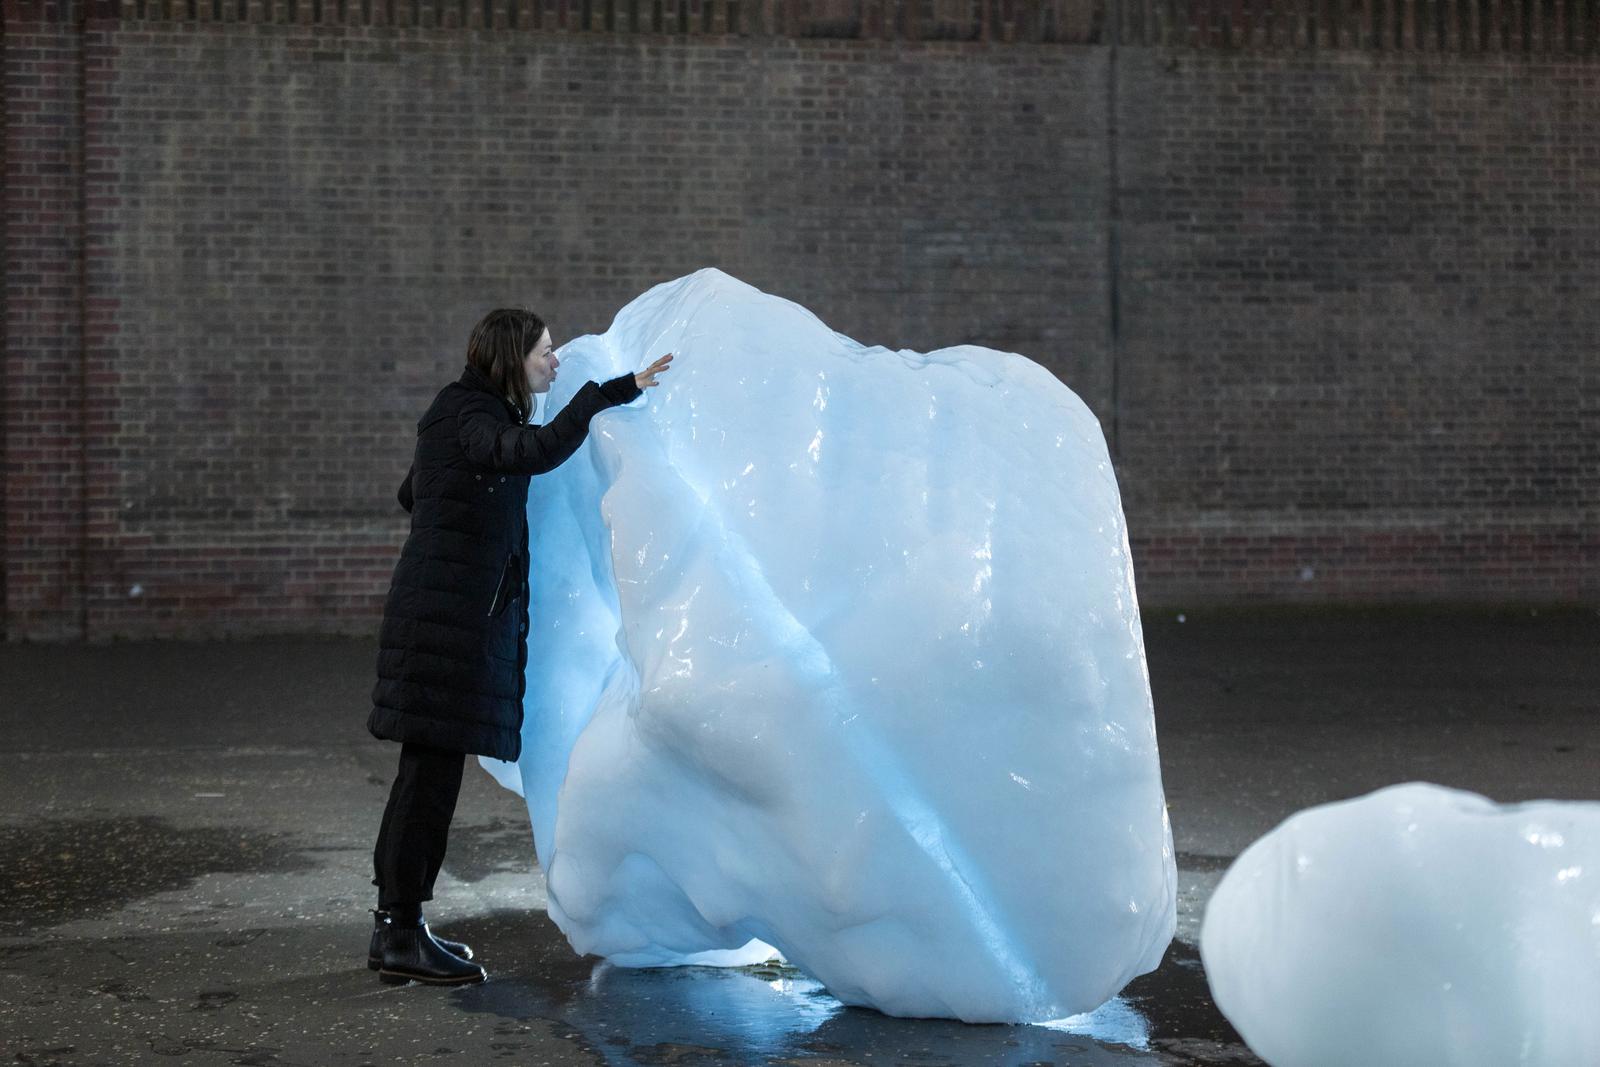 Olafur Eliasson, Ice Watch, 2014. Installation view at Bankside, outside Tate Modern, Londra 2018. Photo Justin Sutcliffe